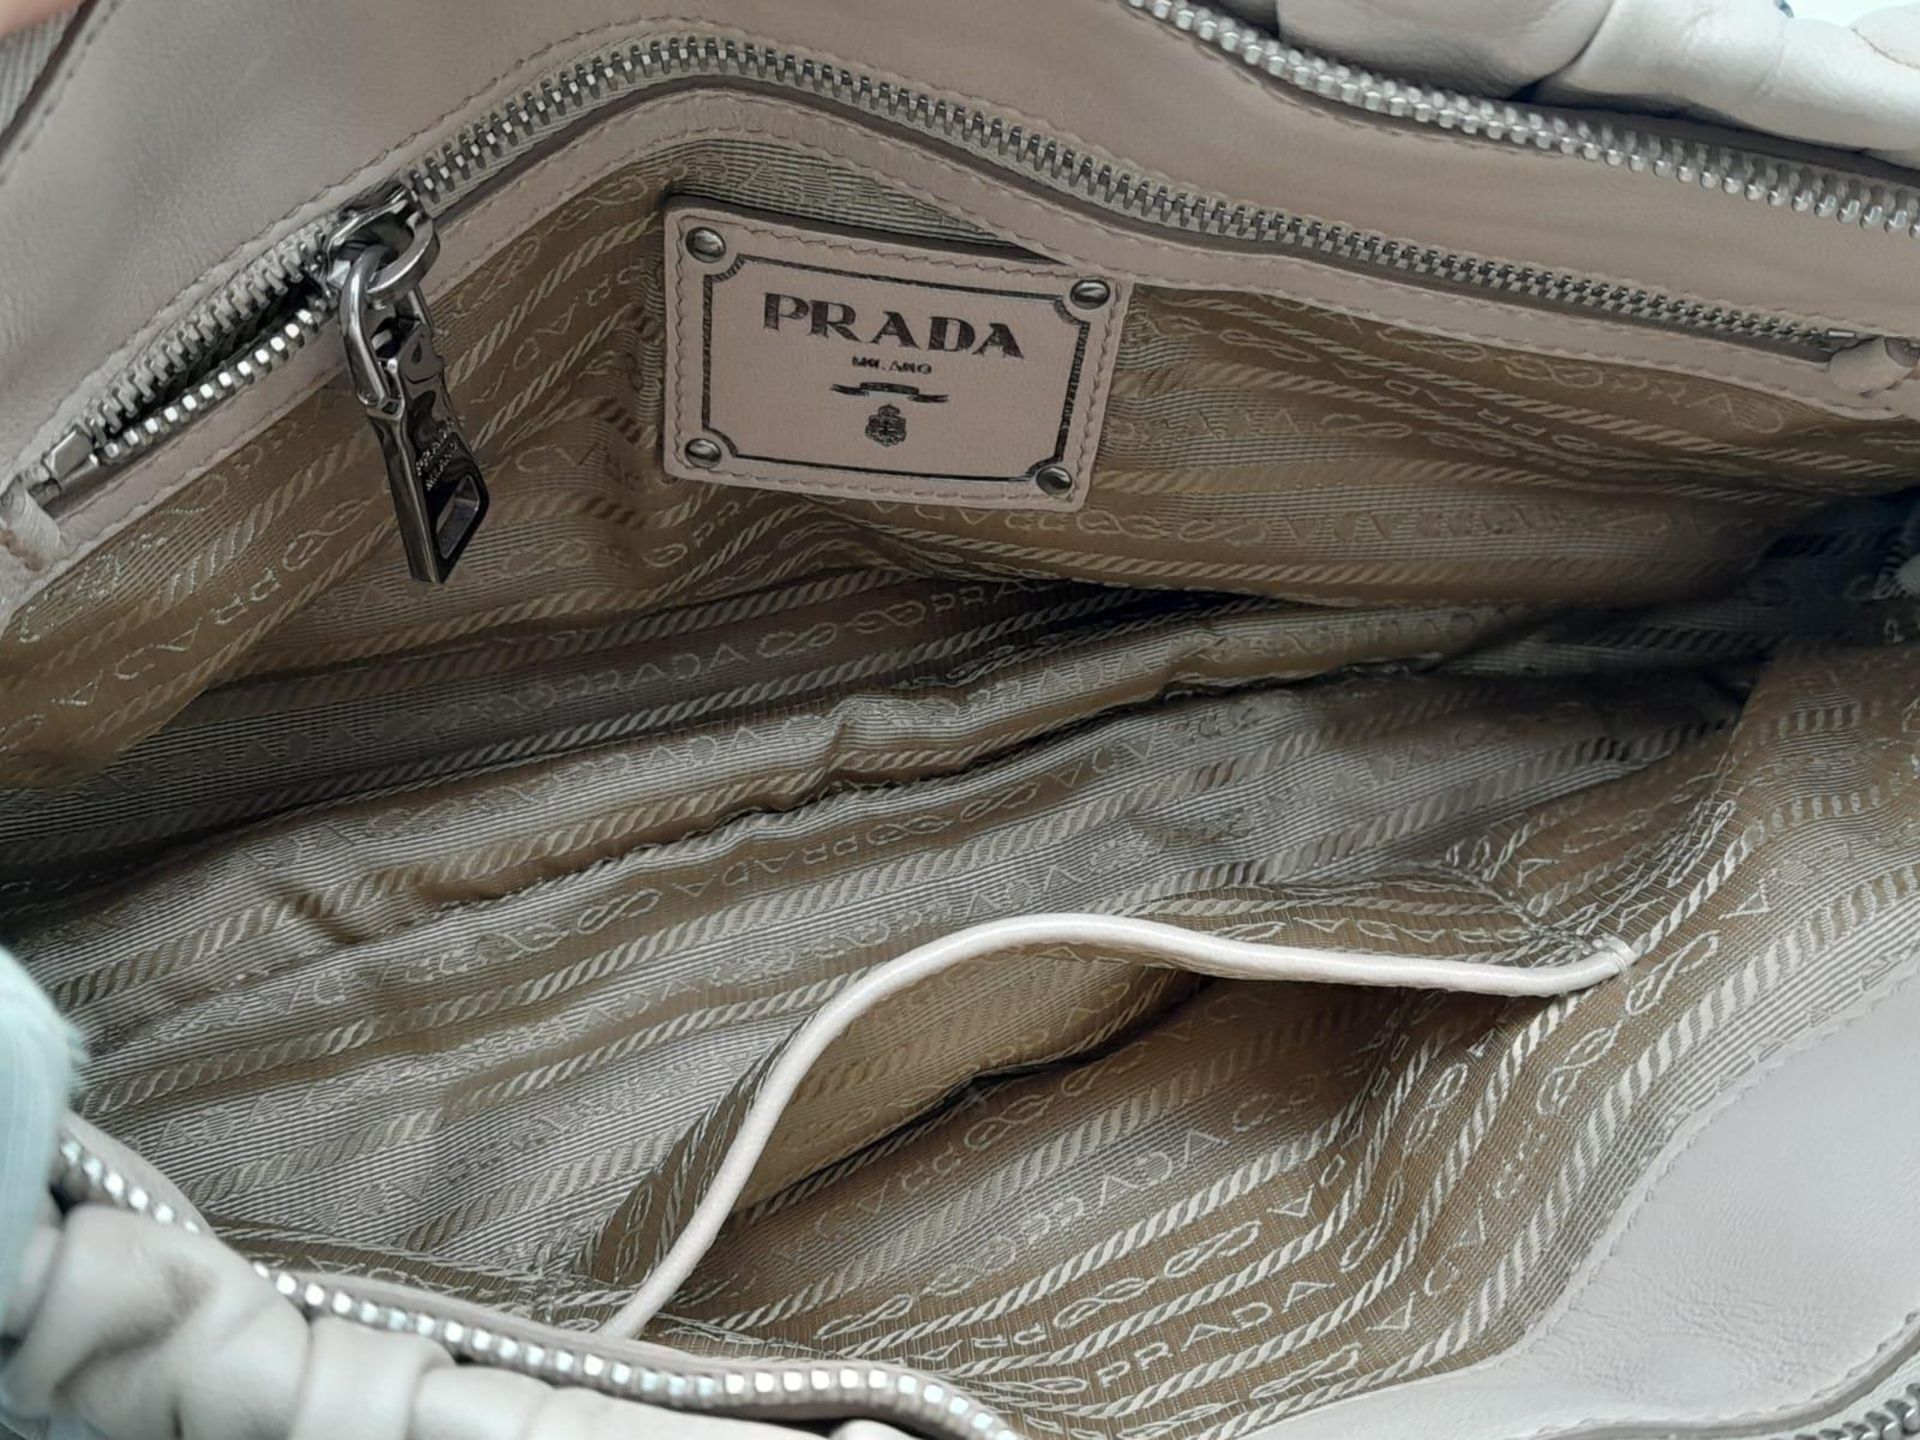 A PRADA BEIGE NAPPA LEATHER GAUFRE POMICE TOTE BAG. SILVER TONE HARD WEAR INCLUDING BUCKLE DETAIL. - Image 27 of 27